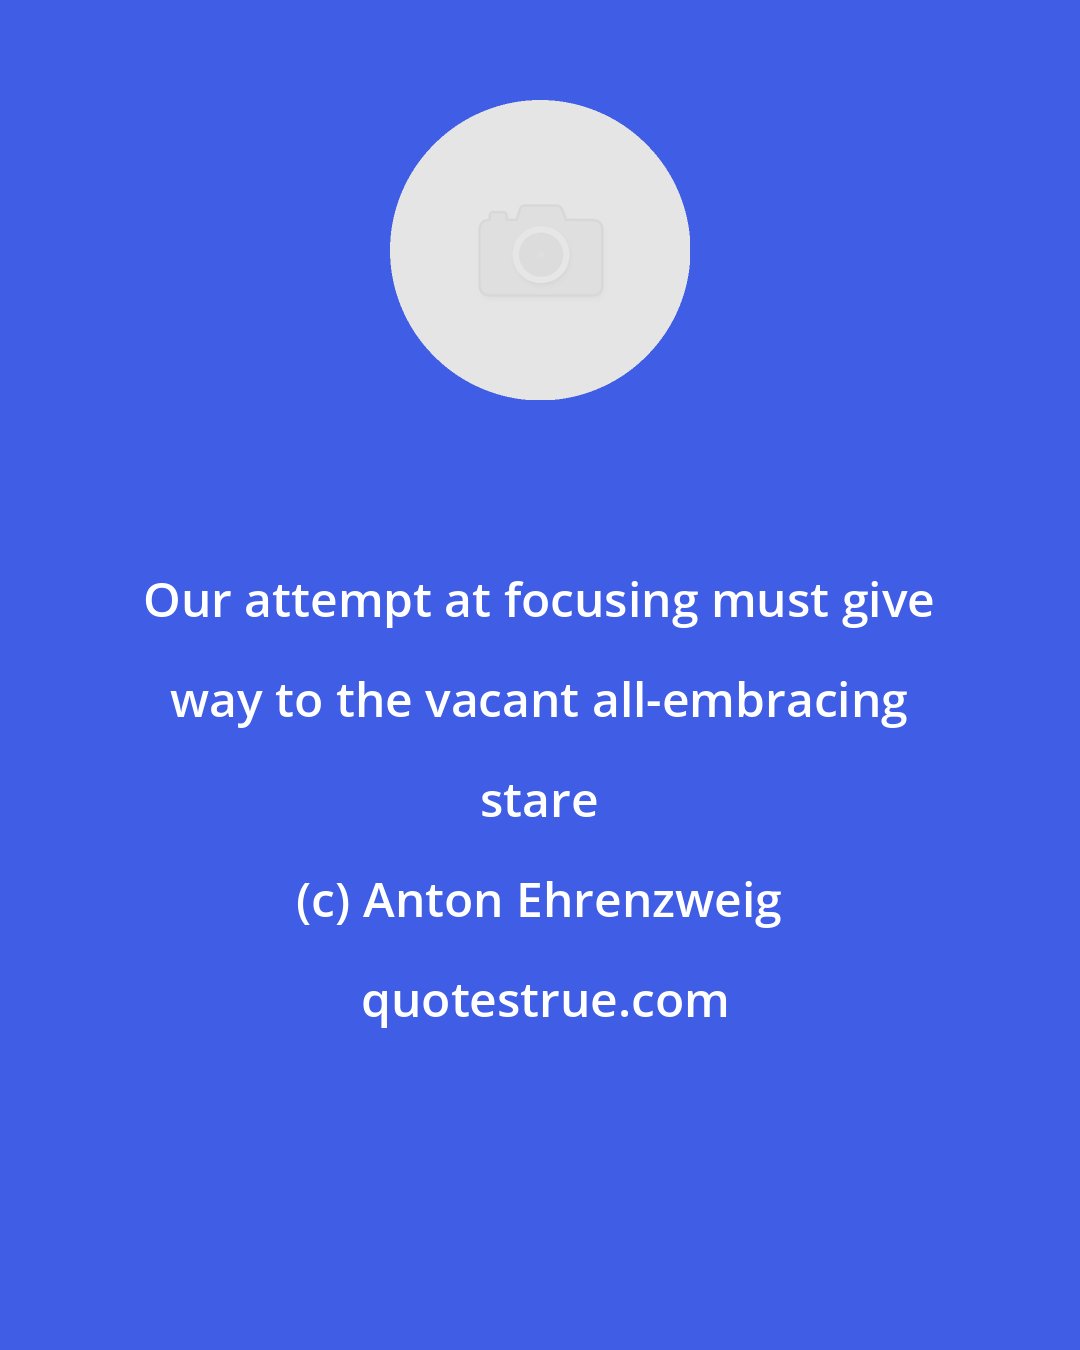 Anton Ehrenzweig: Our attempt at focusing must give way to the vacant all-embracing stare